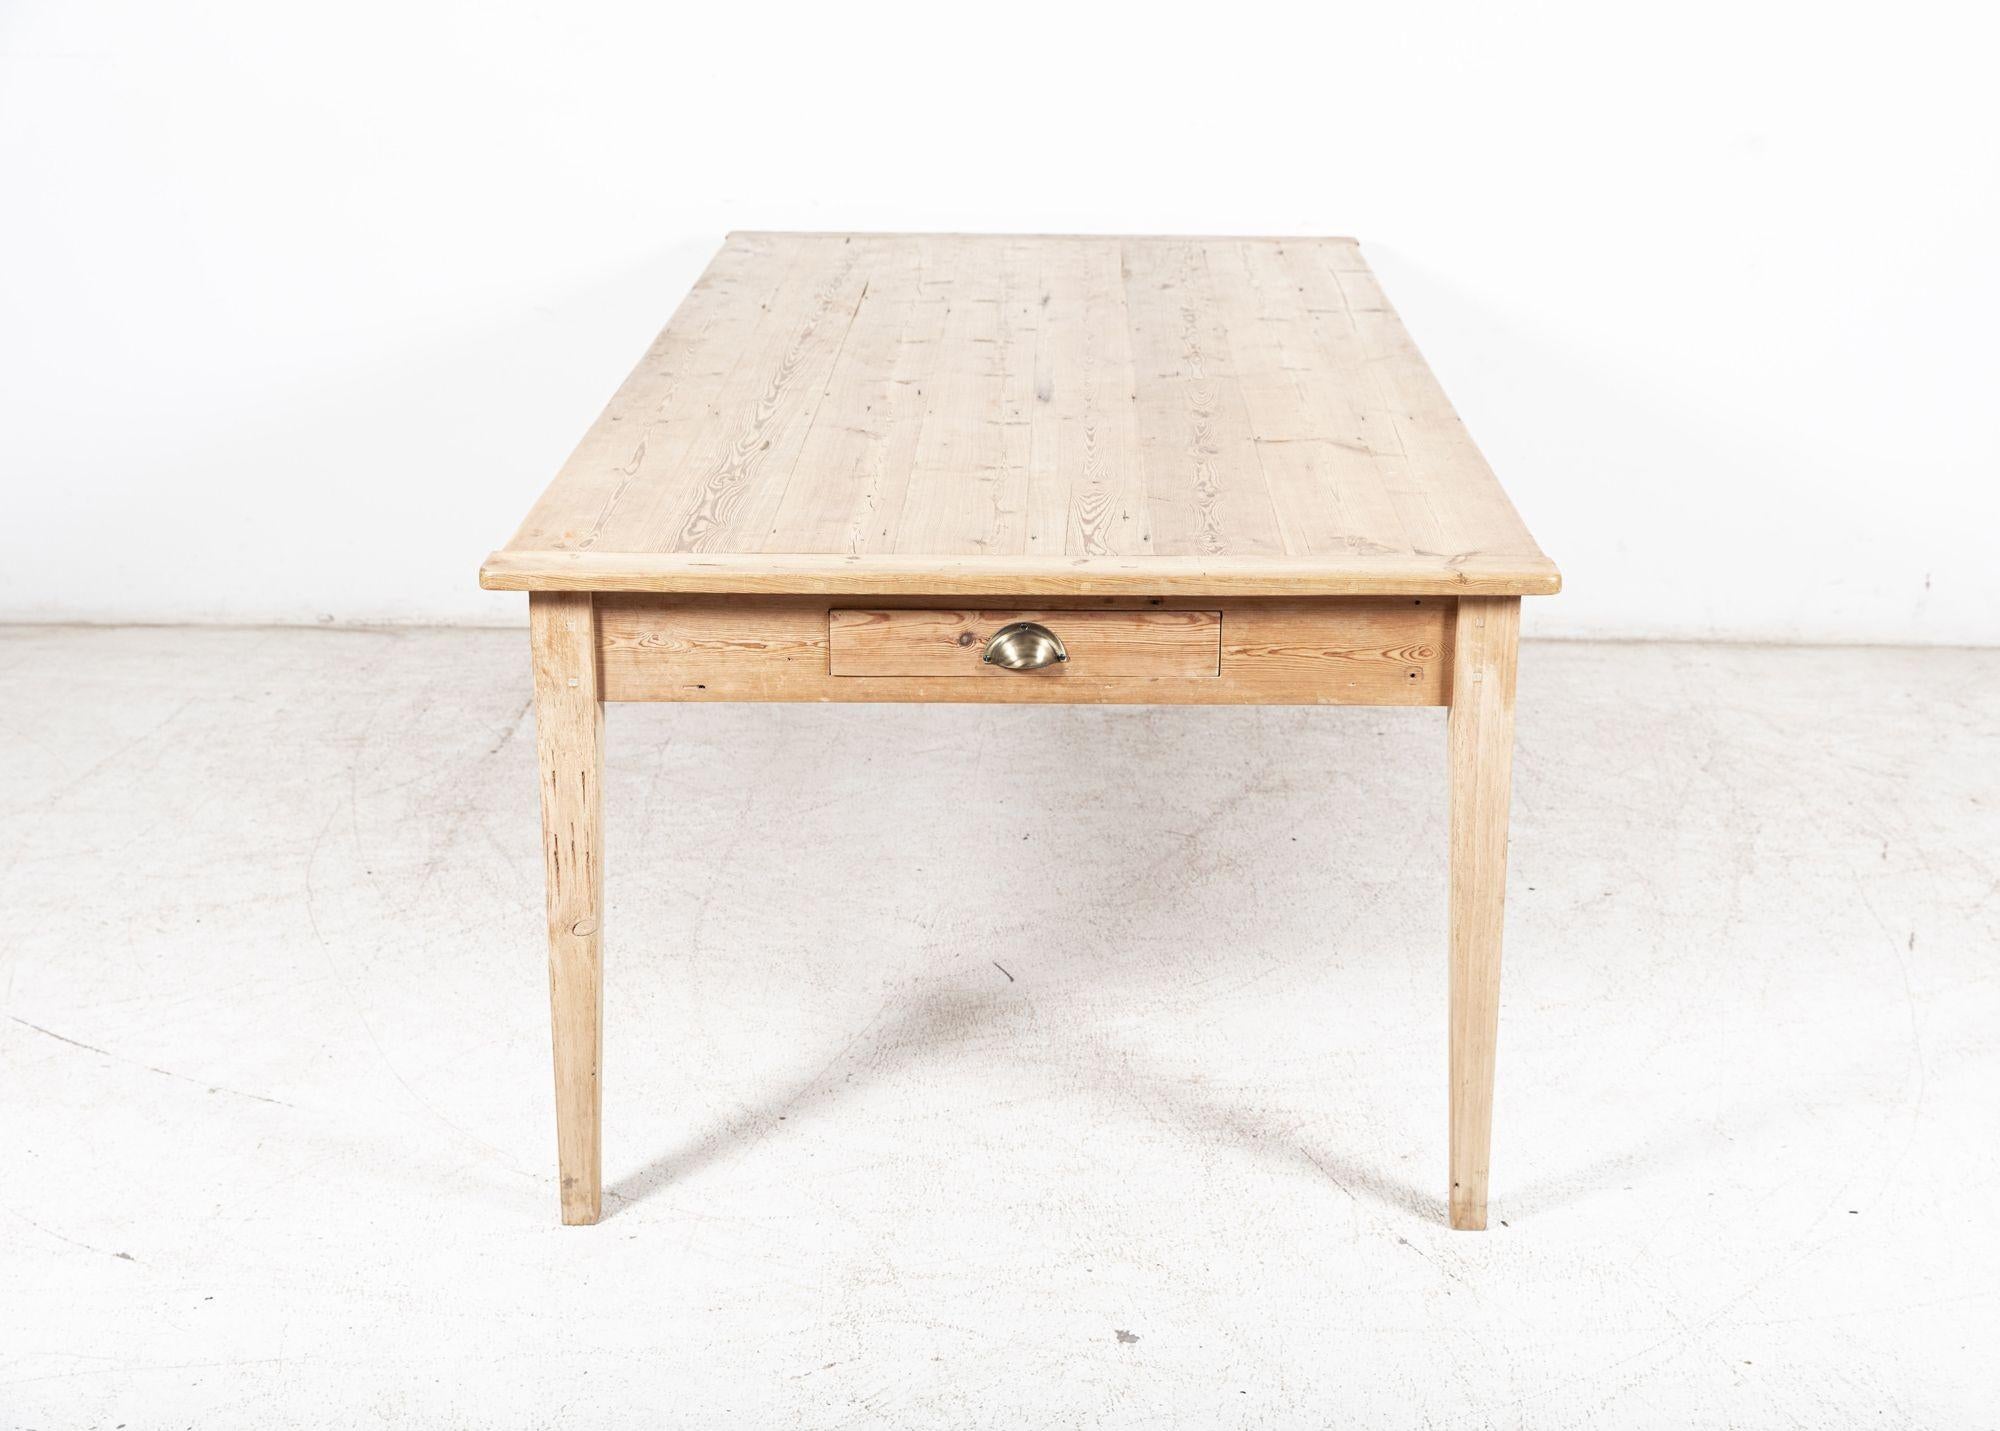 circa 1870

19thC Large English Pine Farmhouse Table with cleated top, cutlery drawer & tapered legs. Stamped

sku 1002

Measures: W220 x D110 x H77 cm

Apron 60 cm.